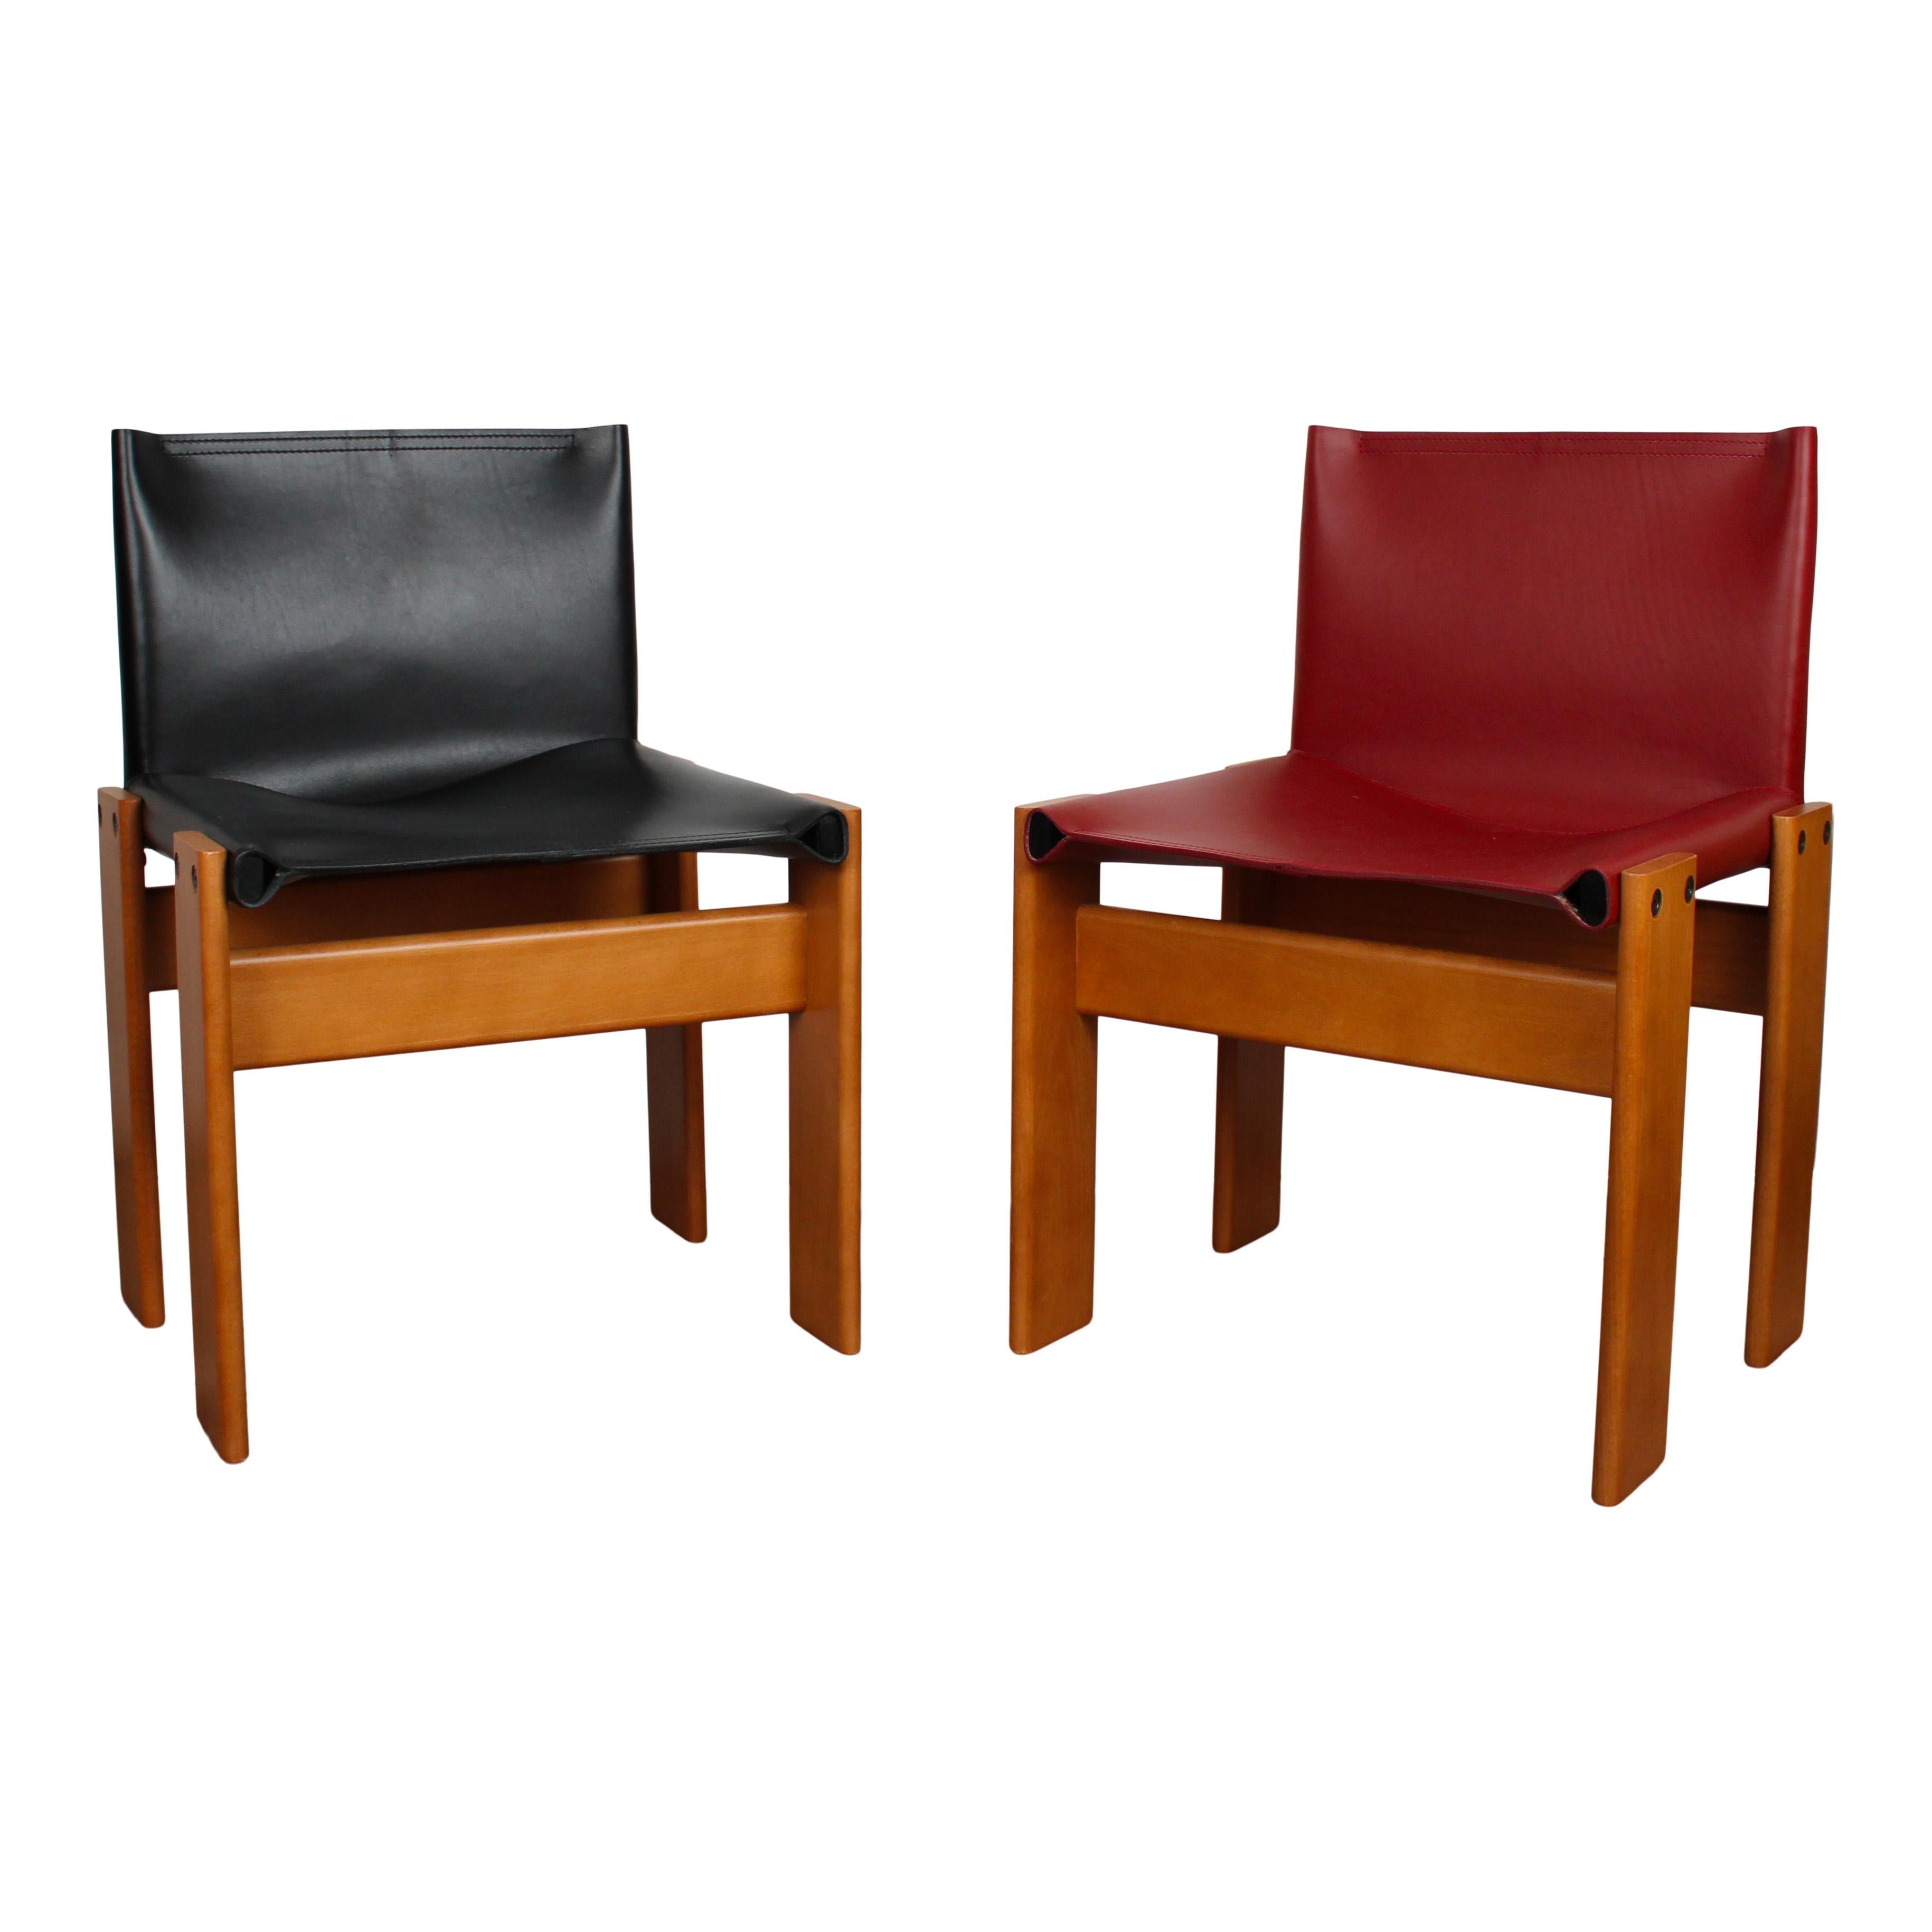 Afra & Tobia Scarpa Black & Red Leather Monk Dining Chair for Molteni, Set of 12 In Good Condition For Sale In Vicenza, IT